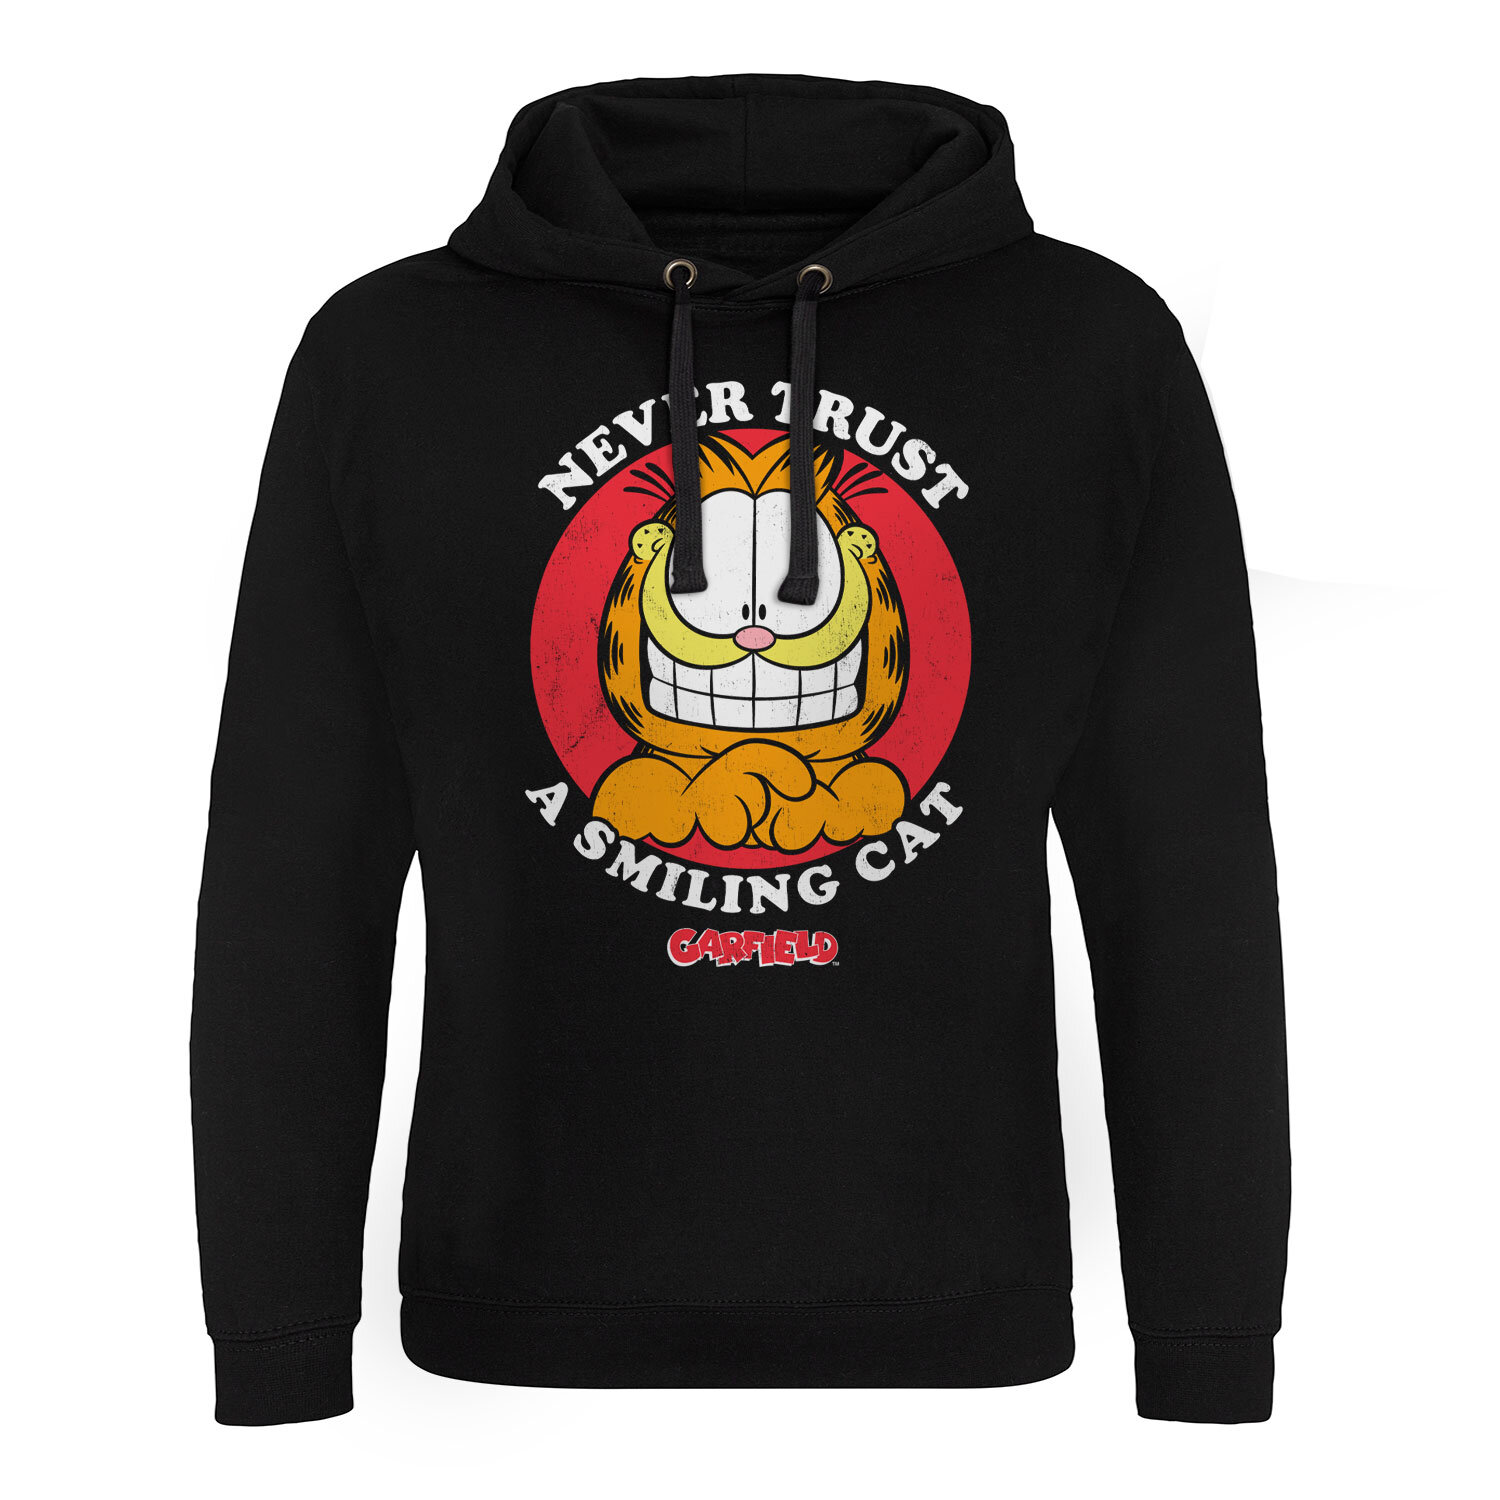 Garfield - Never Trust A Smiling Cat Girly Epic Hoodie